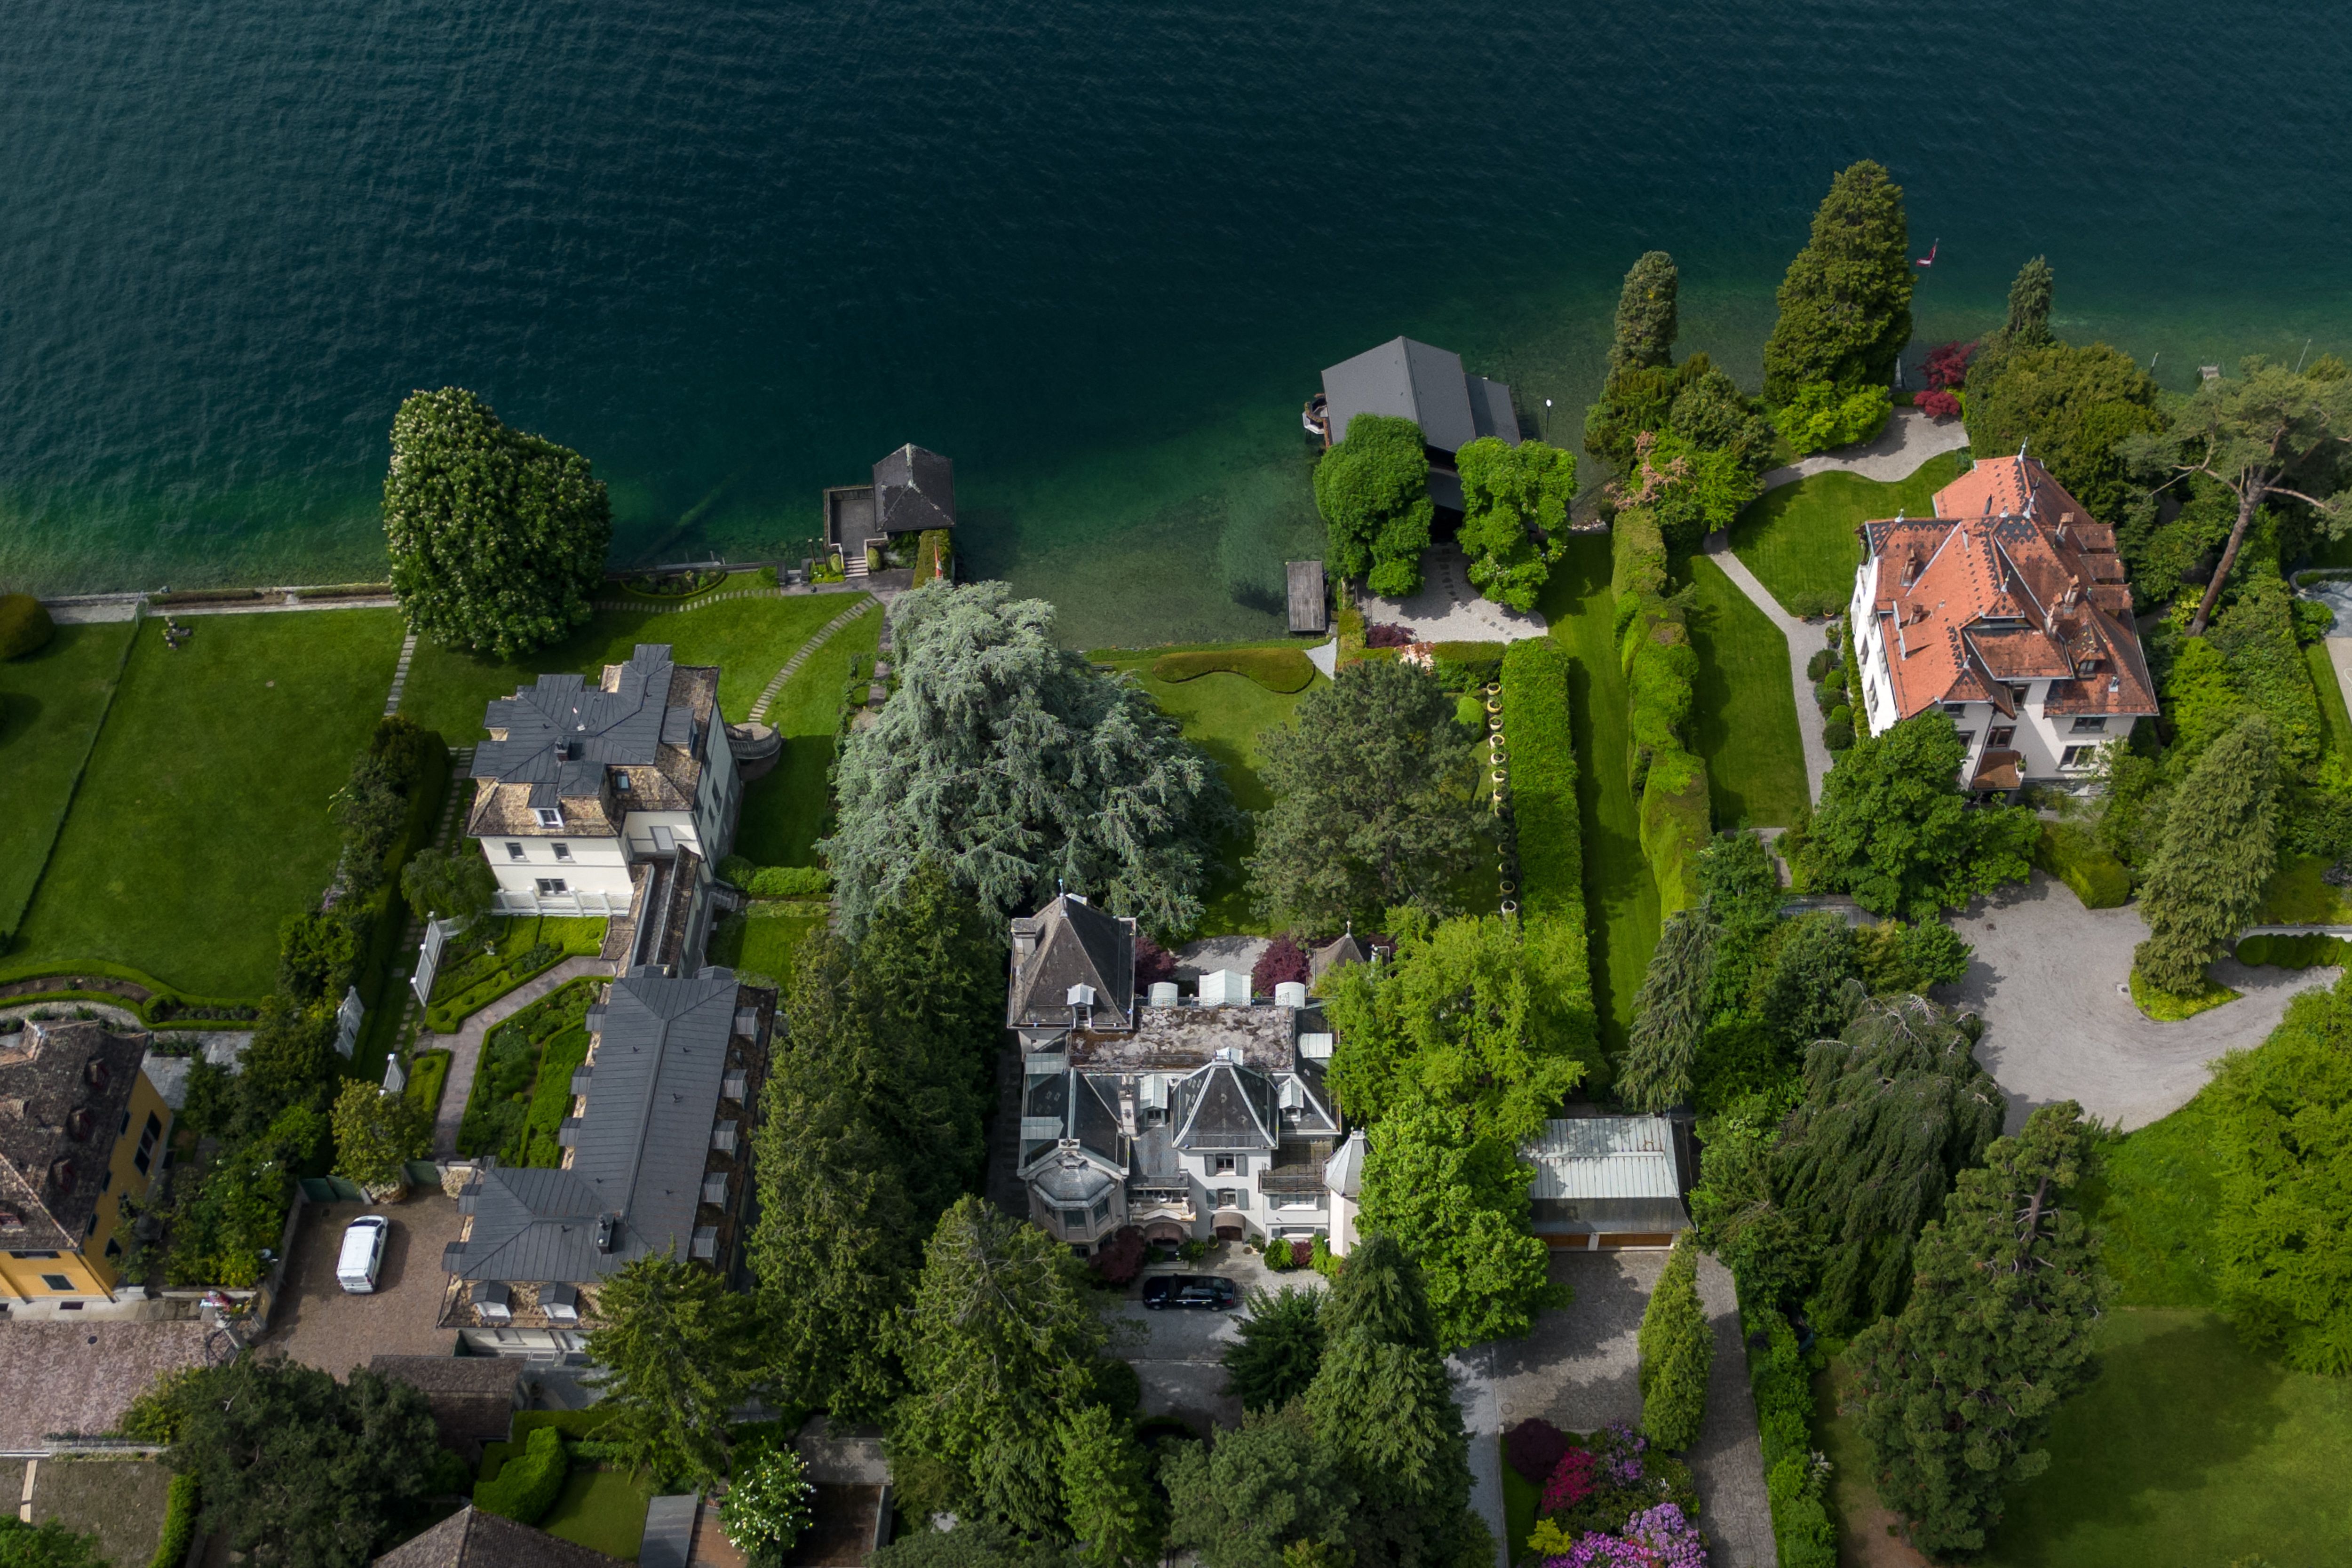 A birds-eye view of Chateau Algonquin in Switzerland | Source: Getty Images